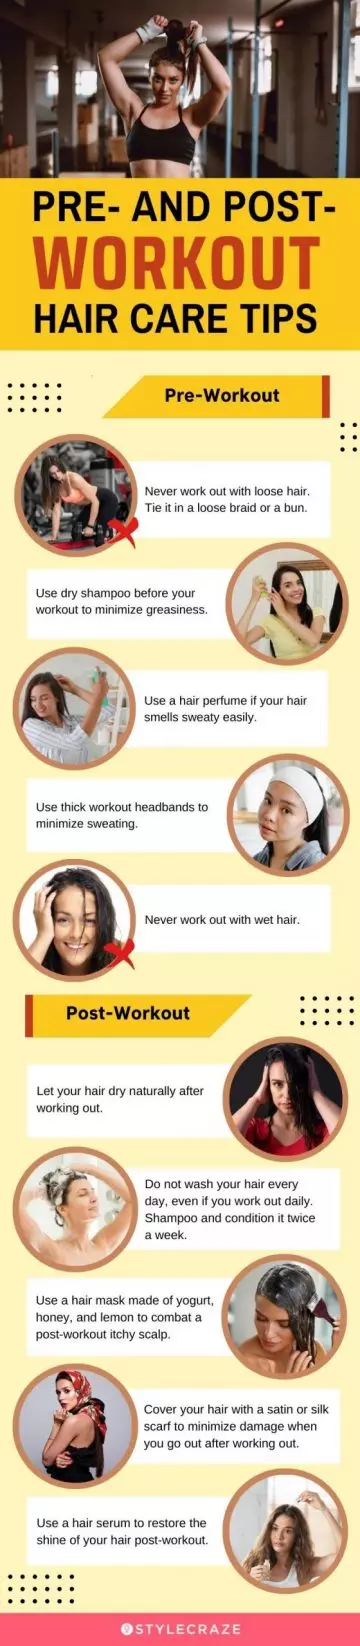 pre and post workout hair care tips (infographic)